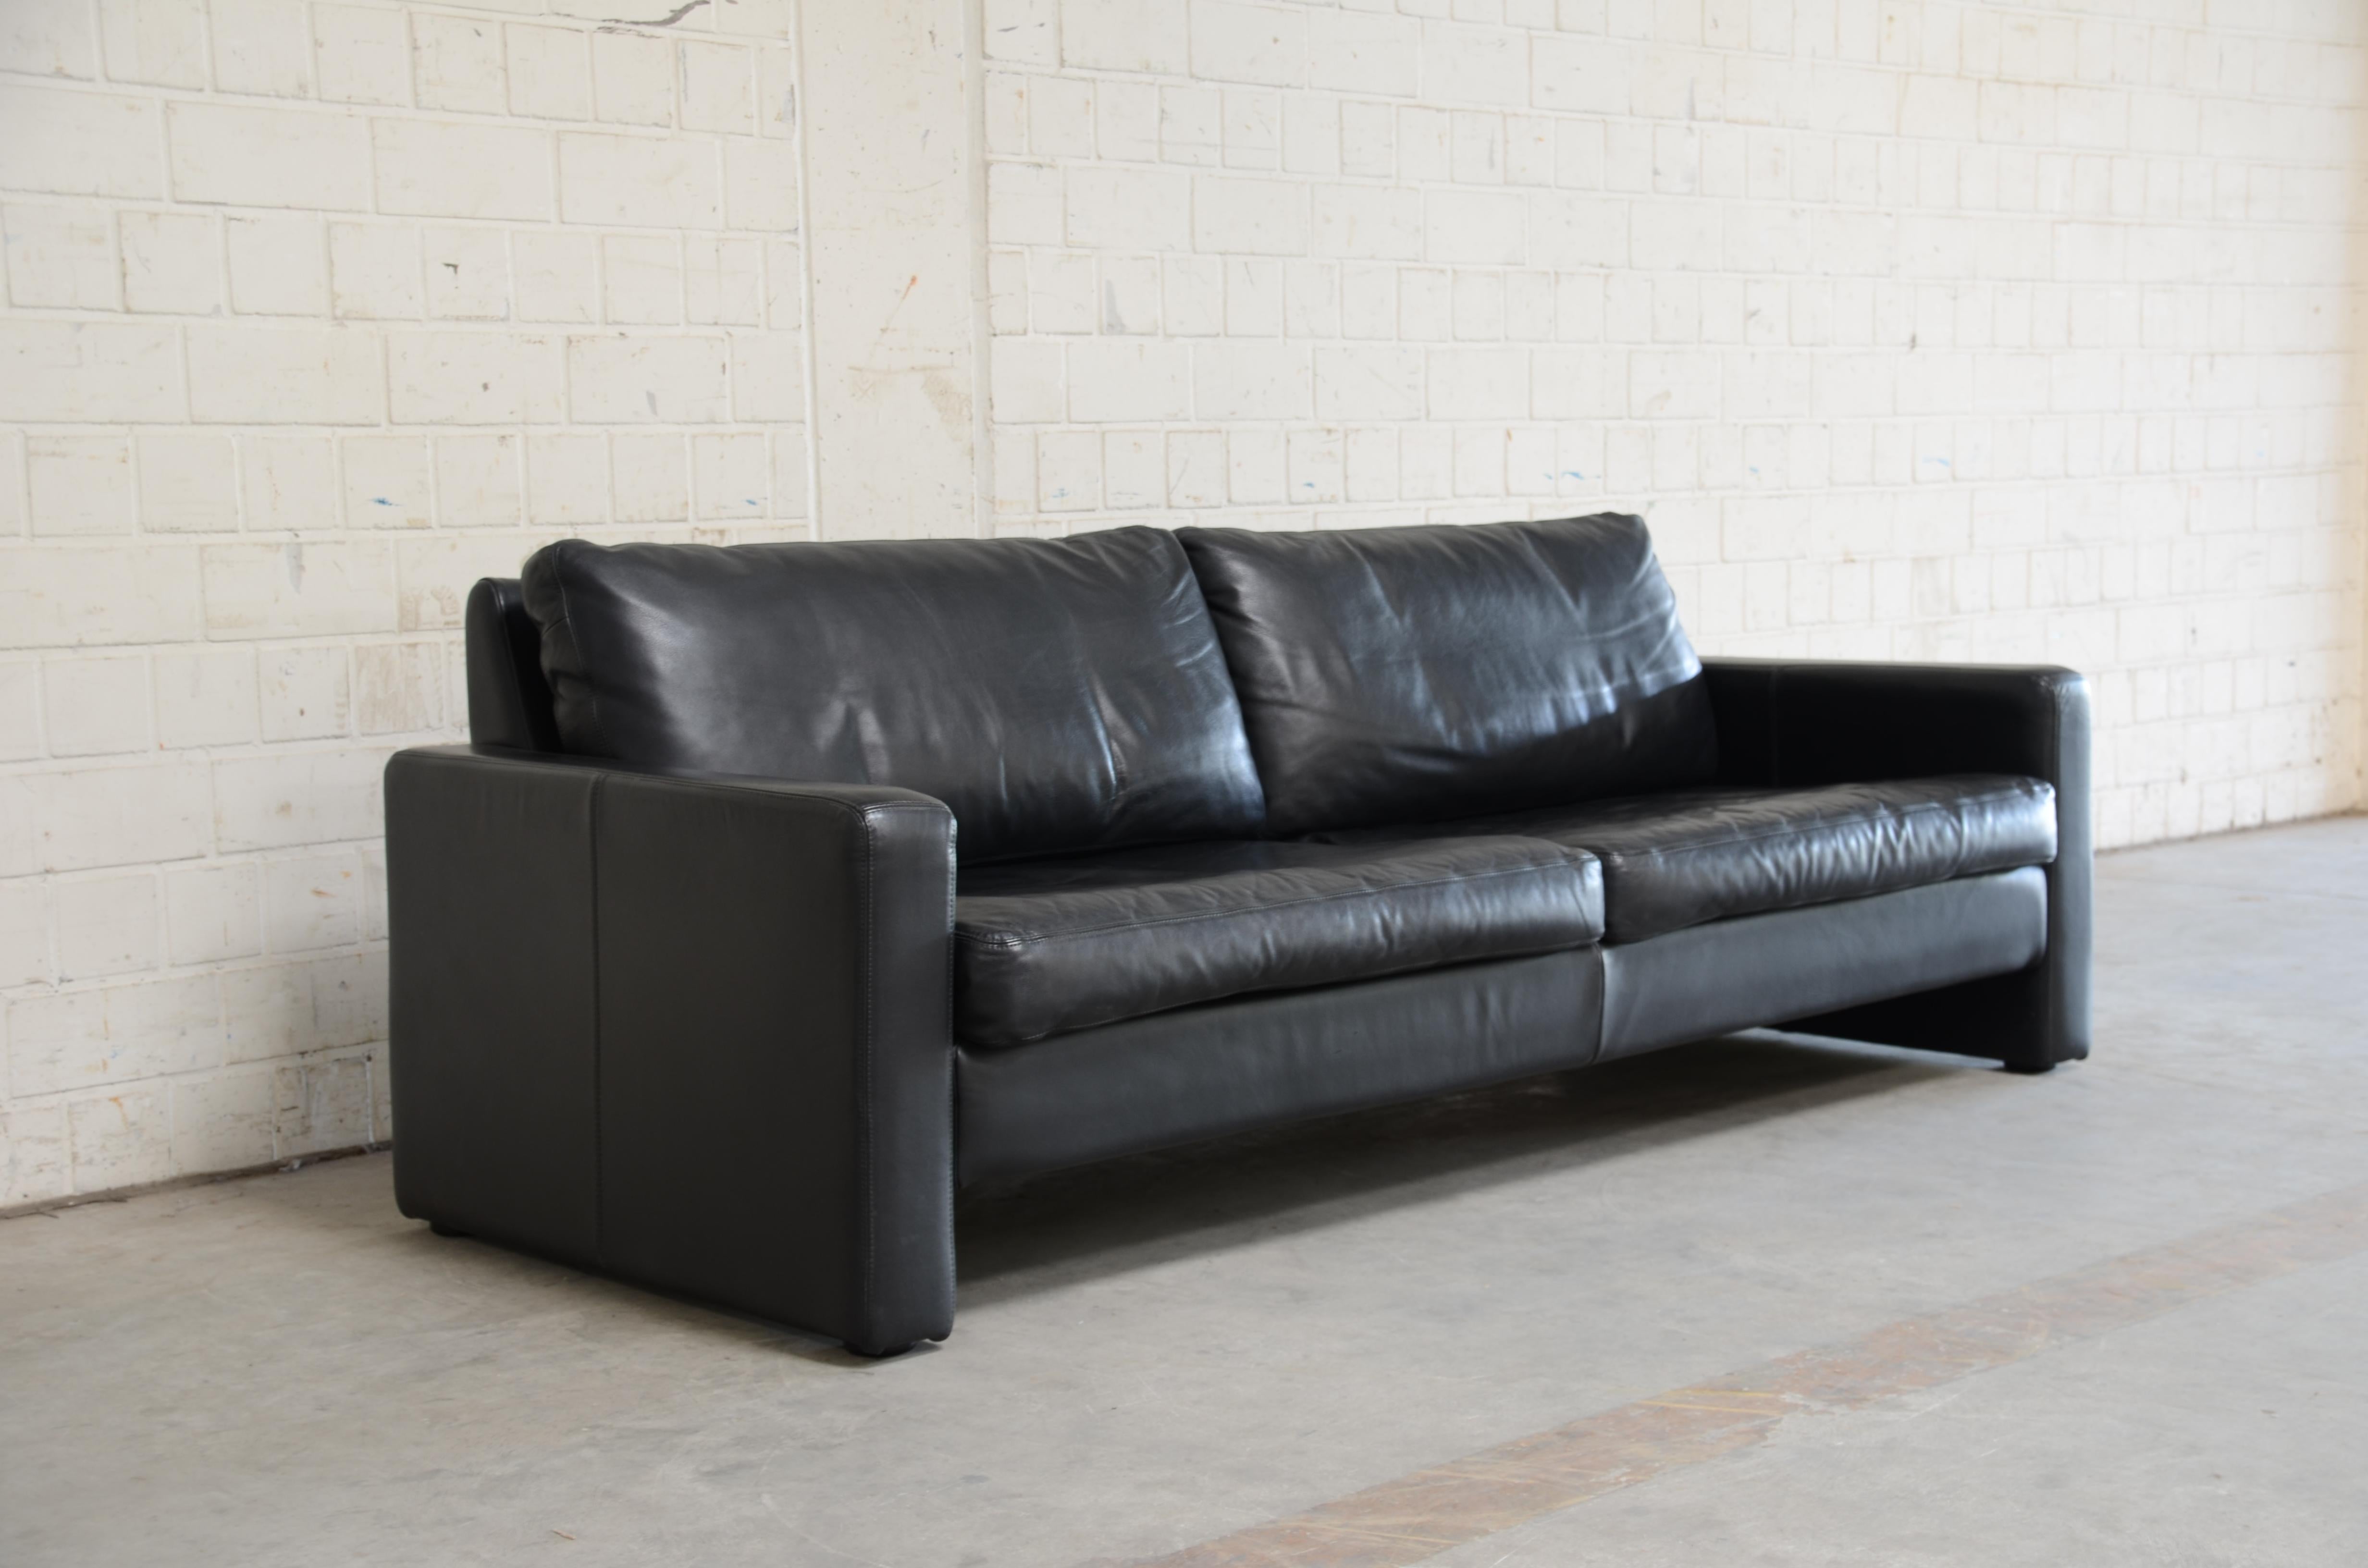 Cor leather sofa model Conseta from the 1990s.
Black aniline leather. The leather has a soft touch.
Comfortable sofa with decent design.
Design by Friedrich Wilhelm Möller
A German masterpiece of functional design.